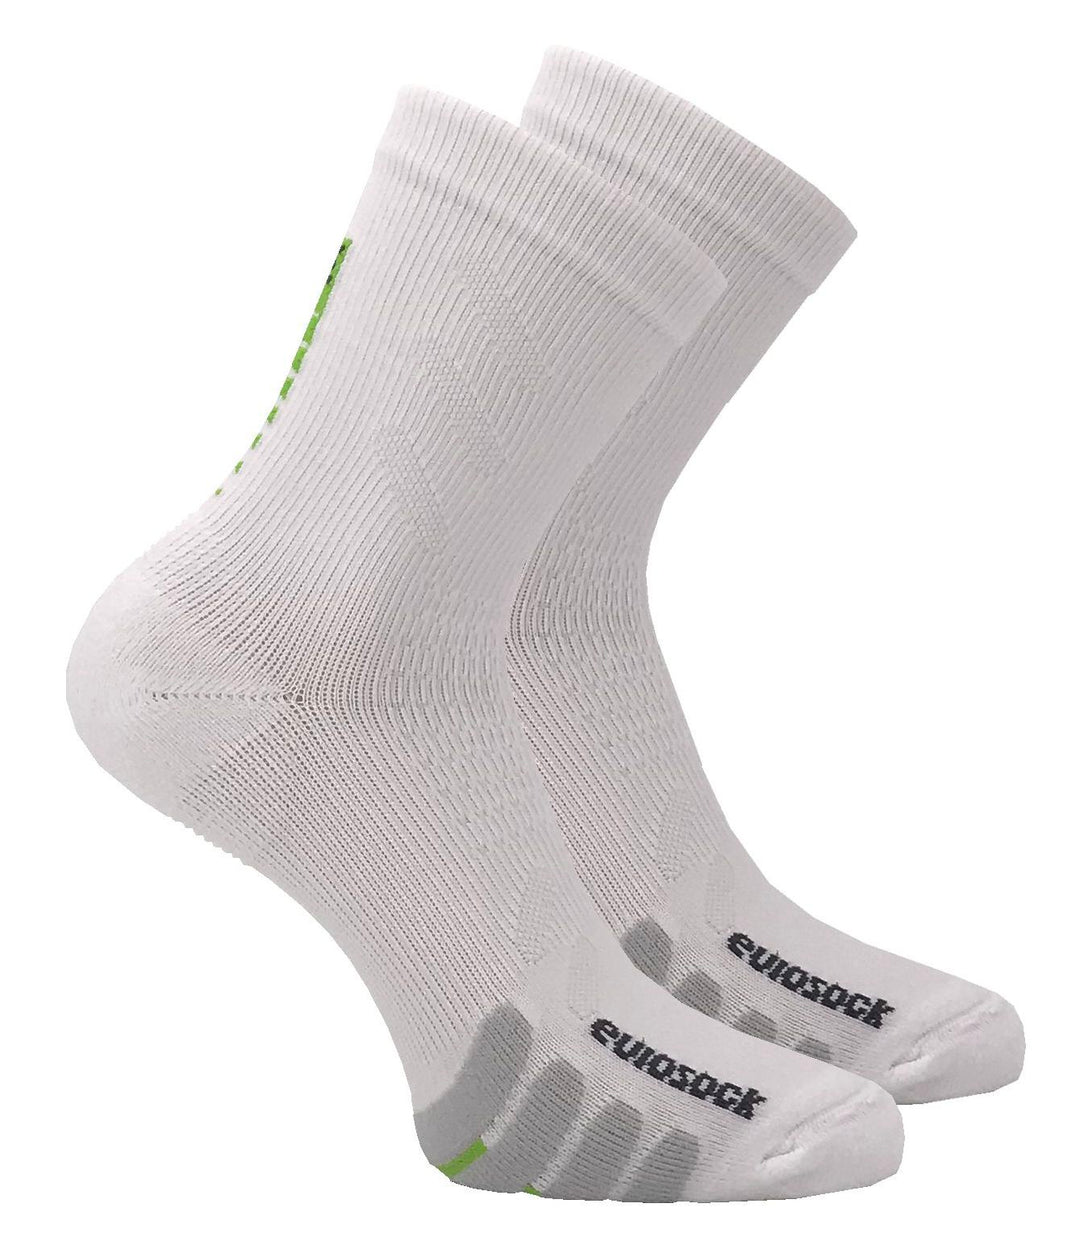 Bike Crew Compression Socks - Two Pair in White